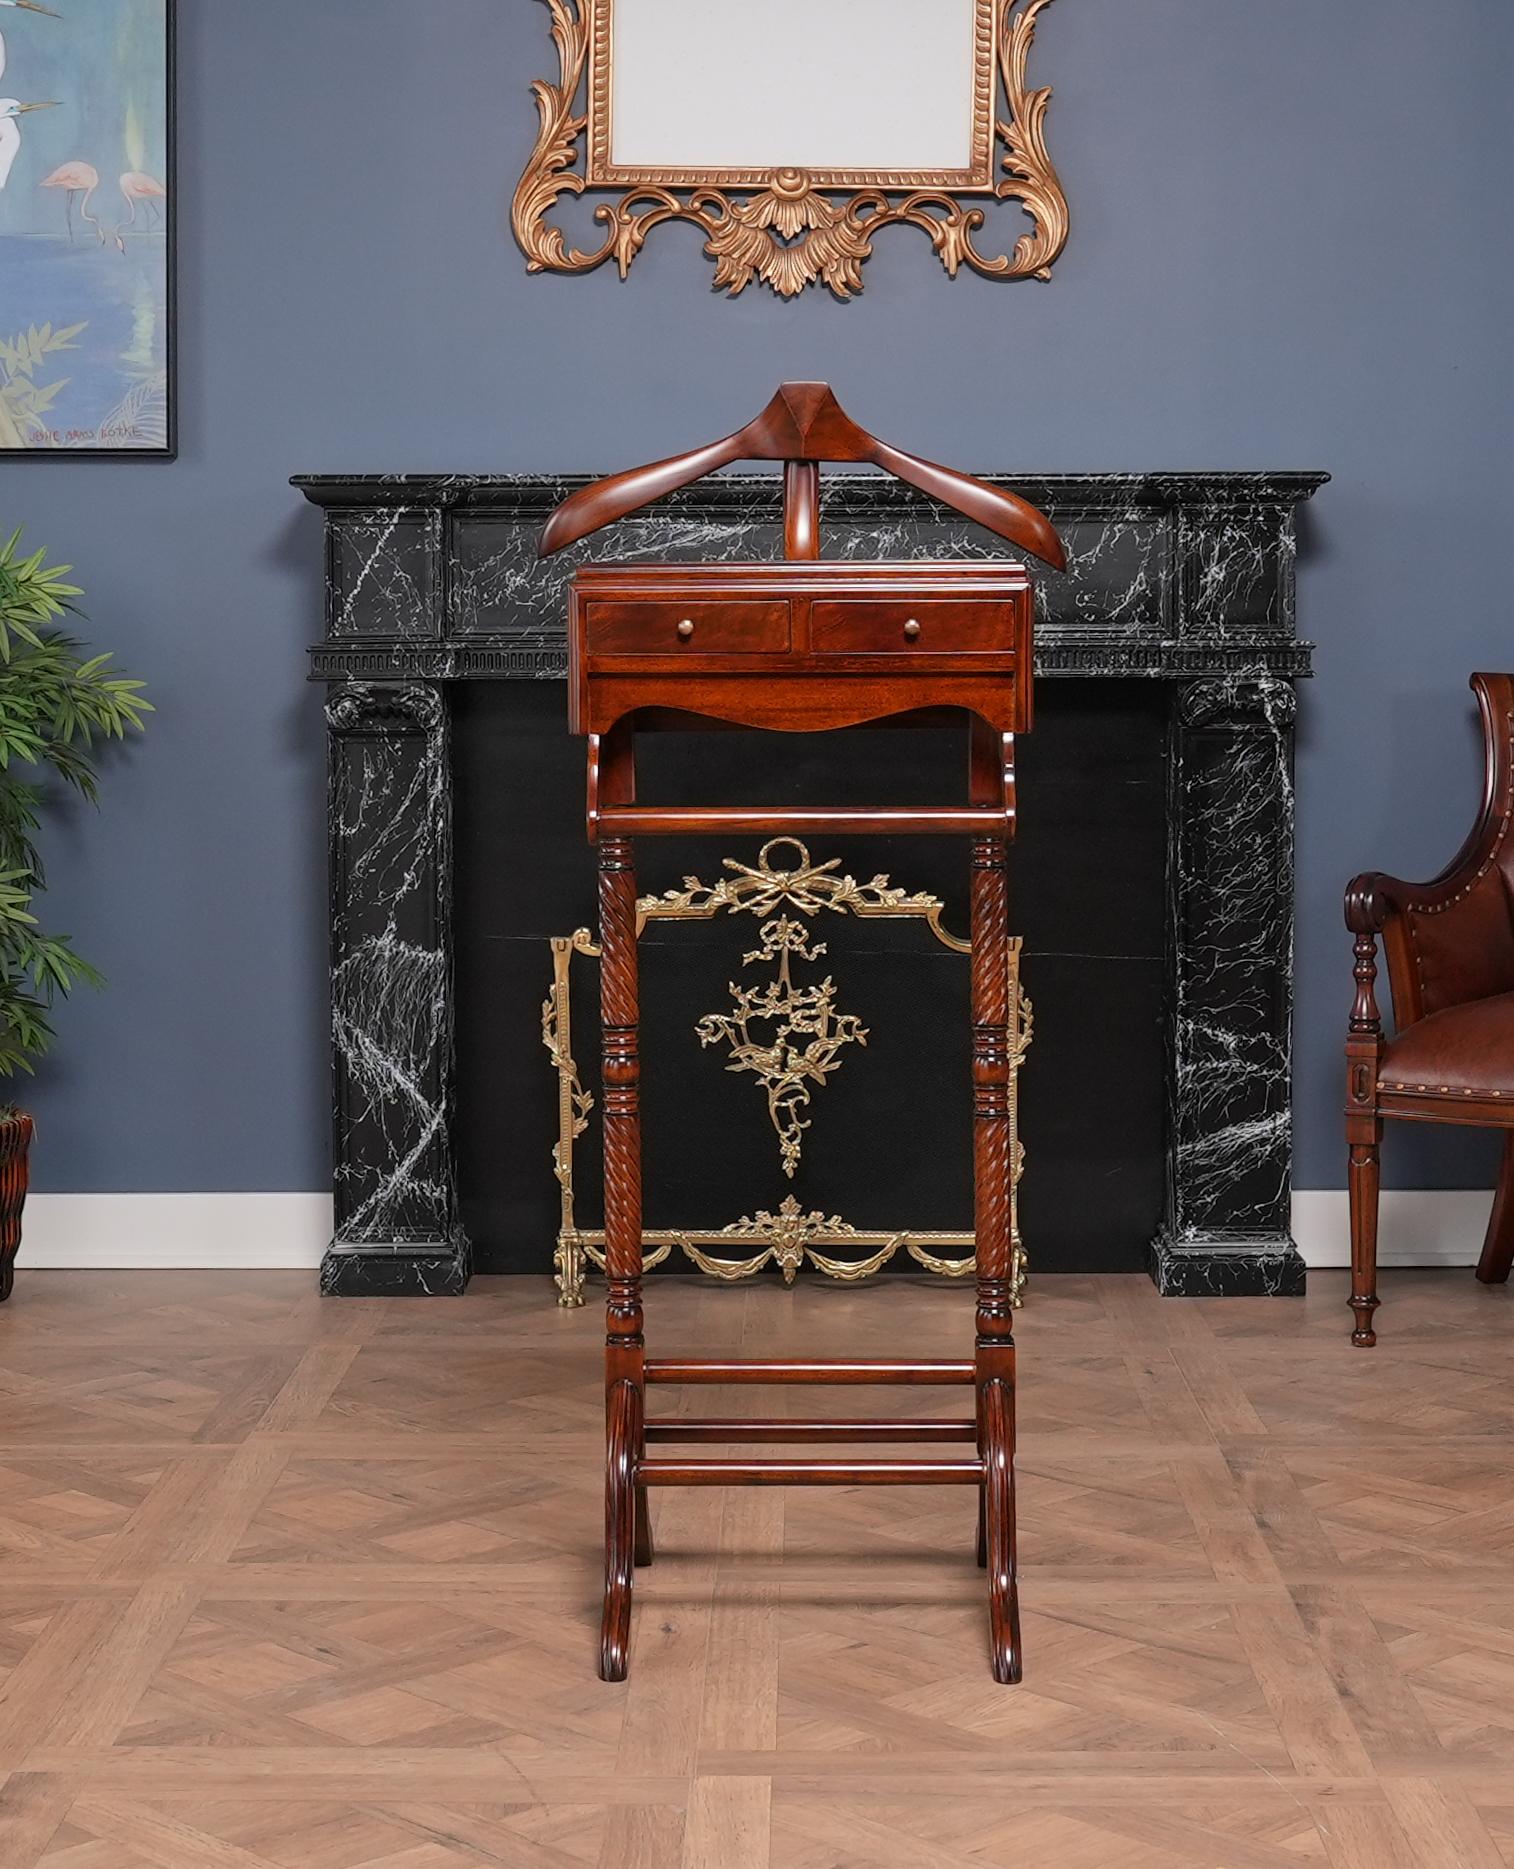 A most useful and decorative item, the Mahogany Valet as produced by Niagara Furniture. Using select solid mahogany and mahogany veneers our artisans produce this item using great quality construction as evidenced by the hand carved details,